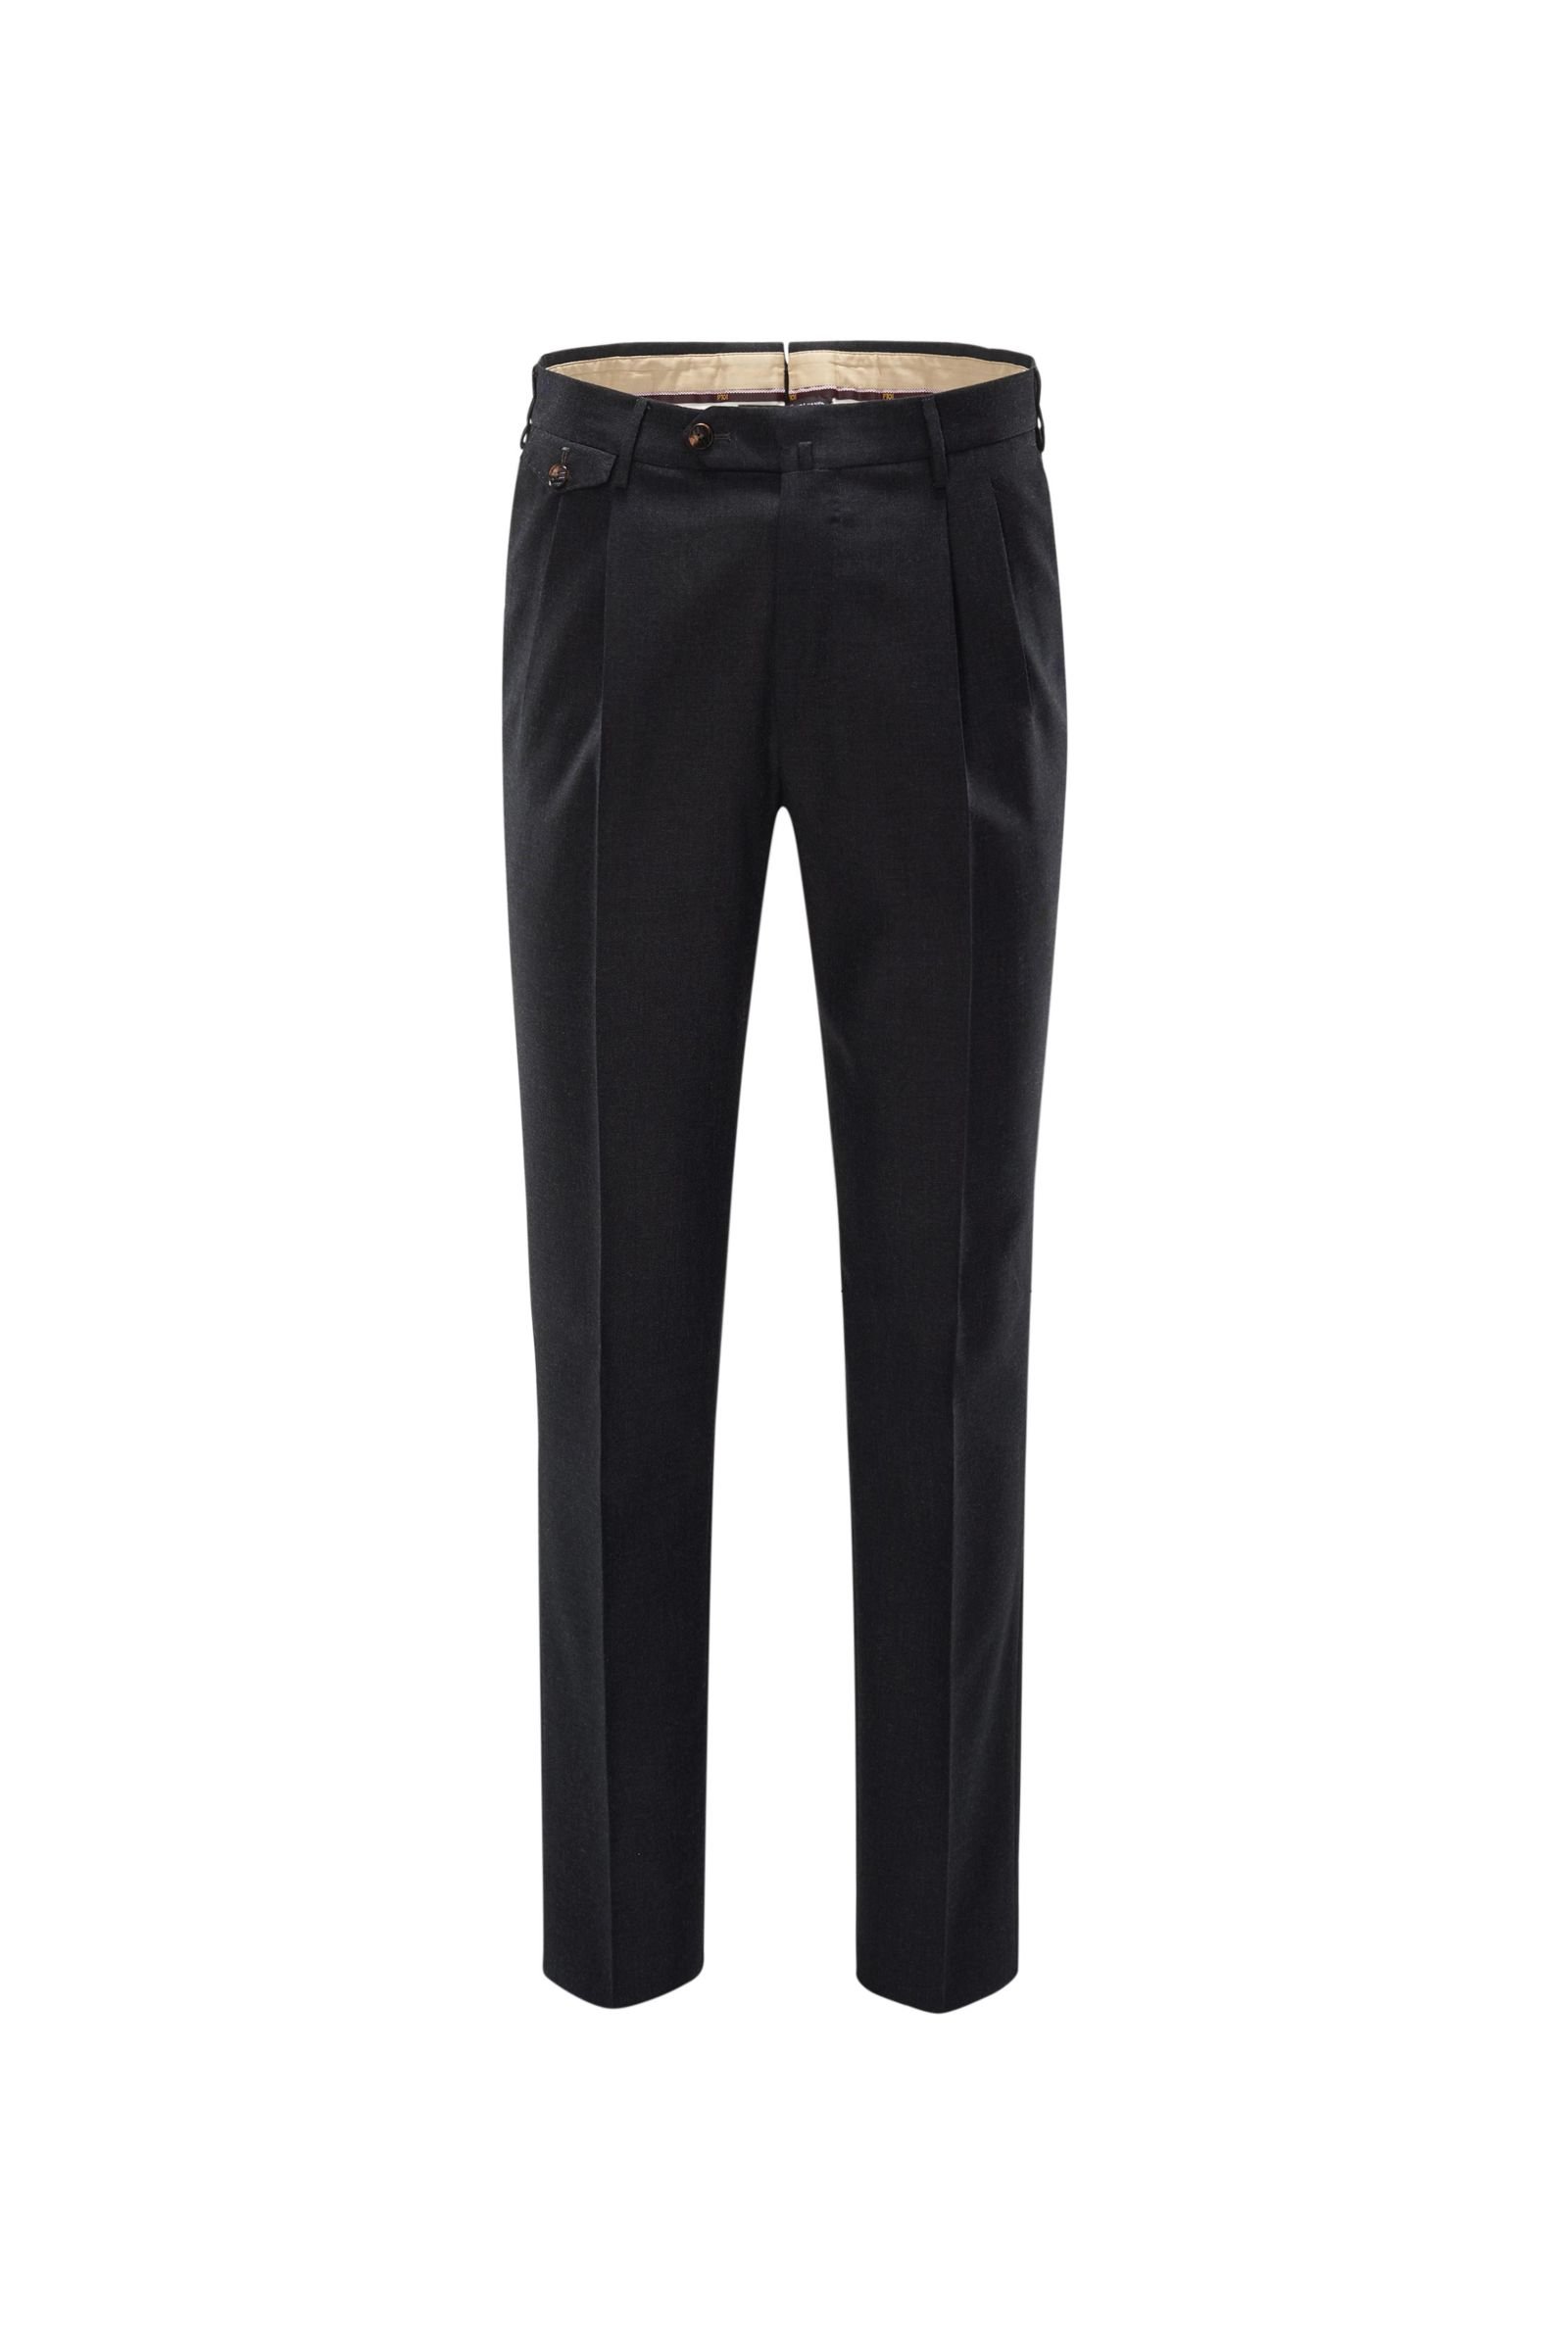 Wool trousers 'The Draper Gentleman Fit' anthracite